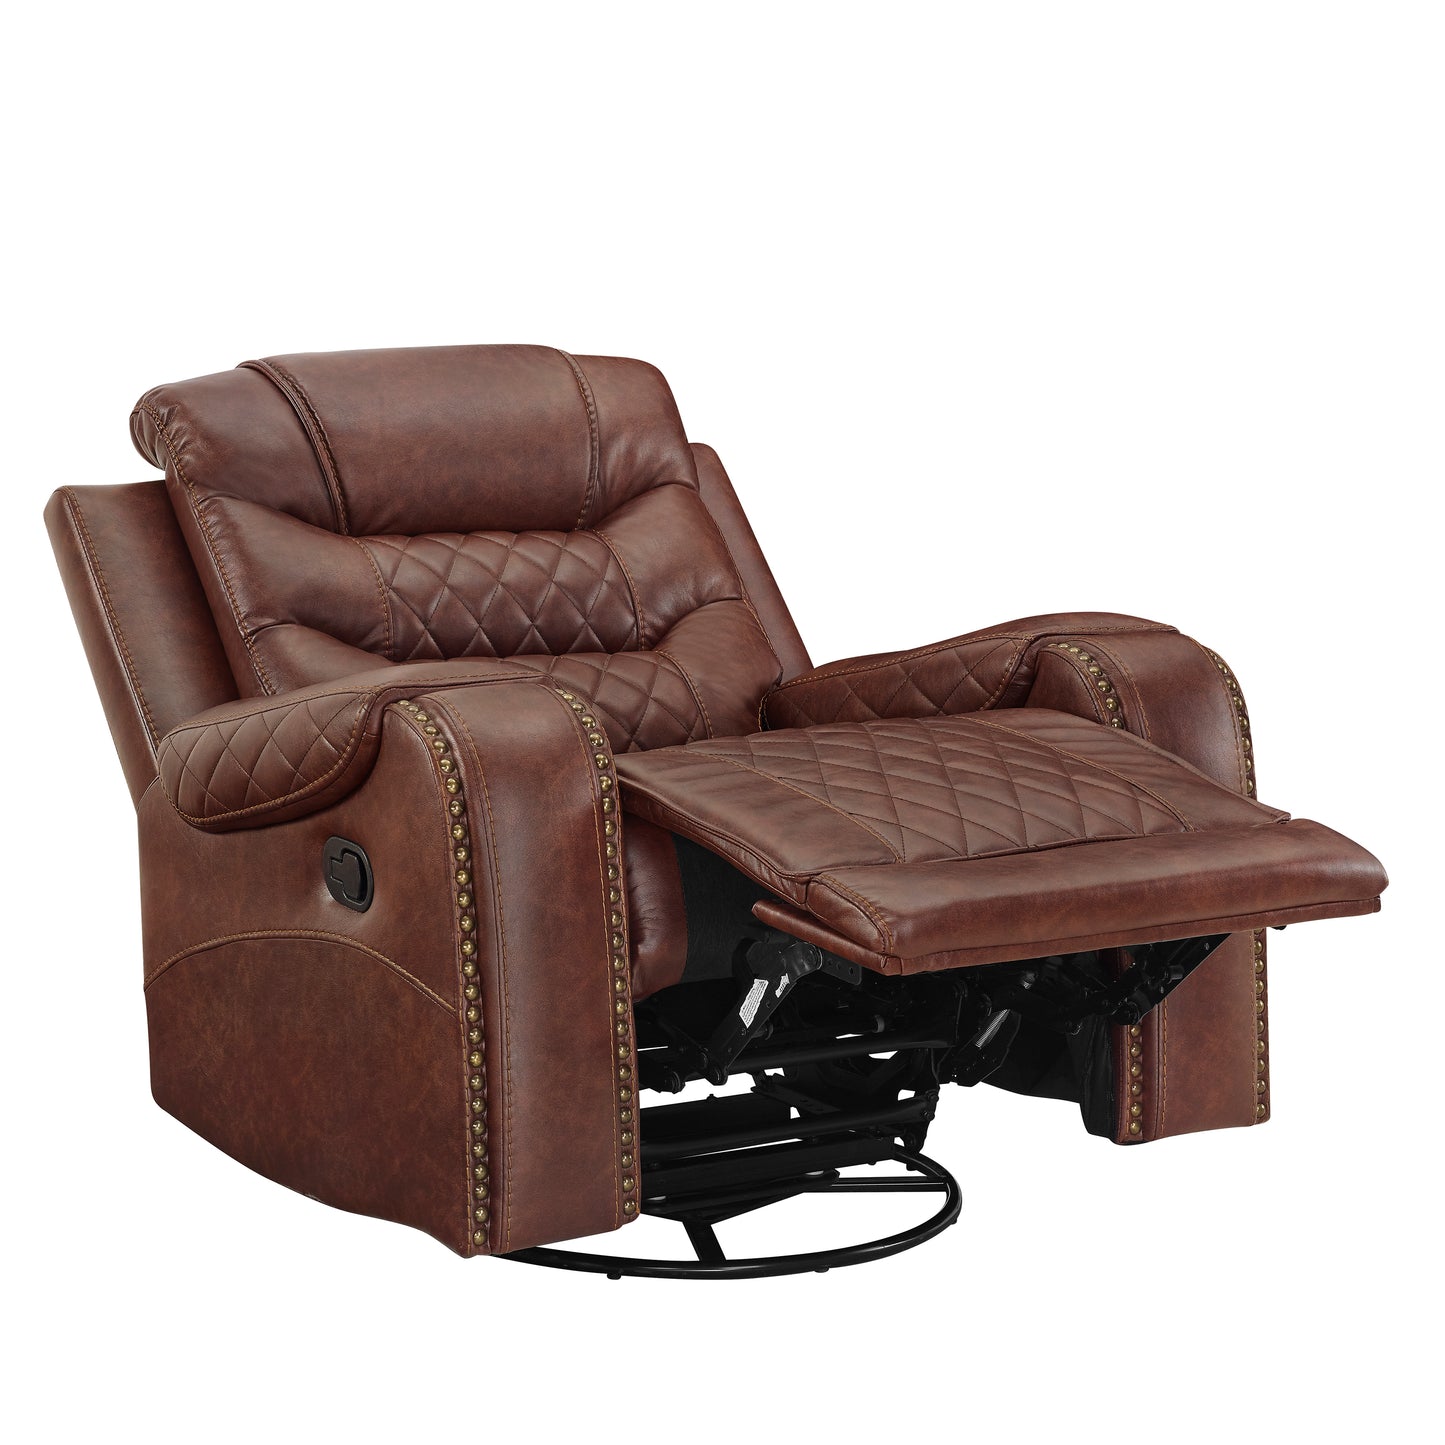 Klens Faux Leather 3-Piece Reclining Living Room Collection with Nailhead Trim, Brown